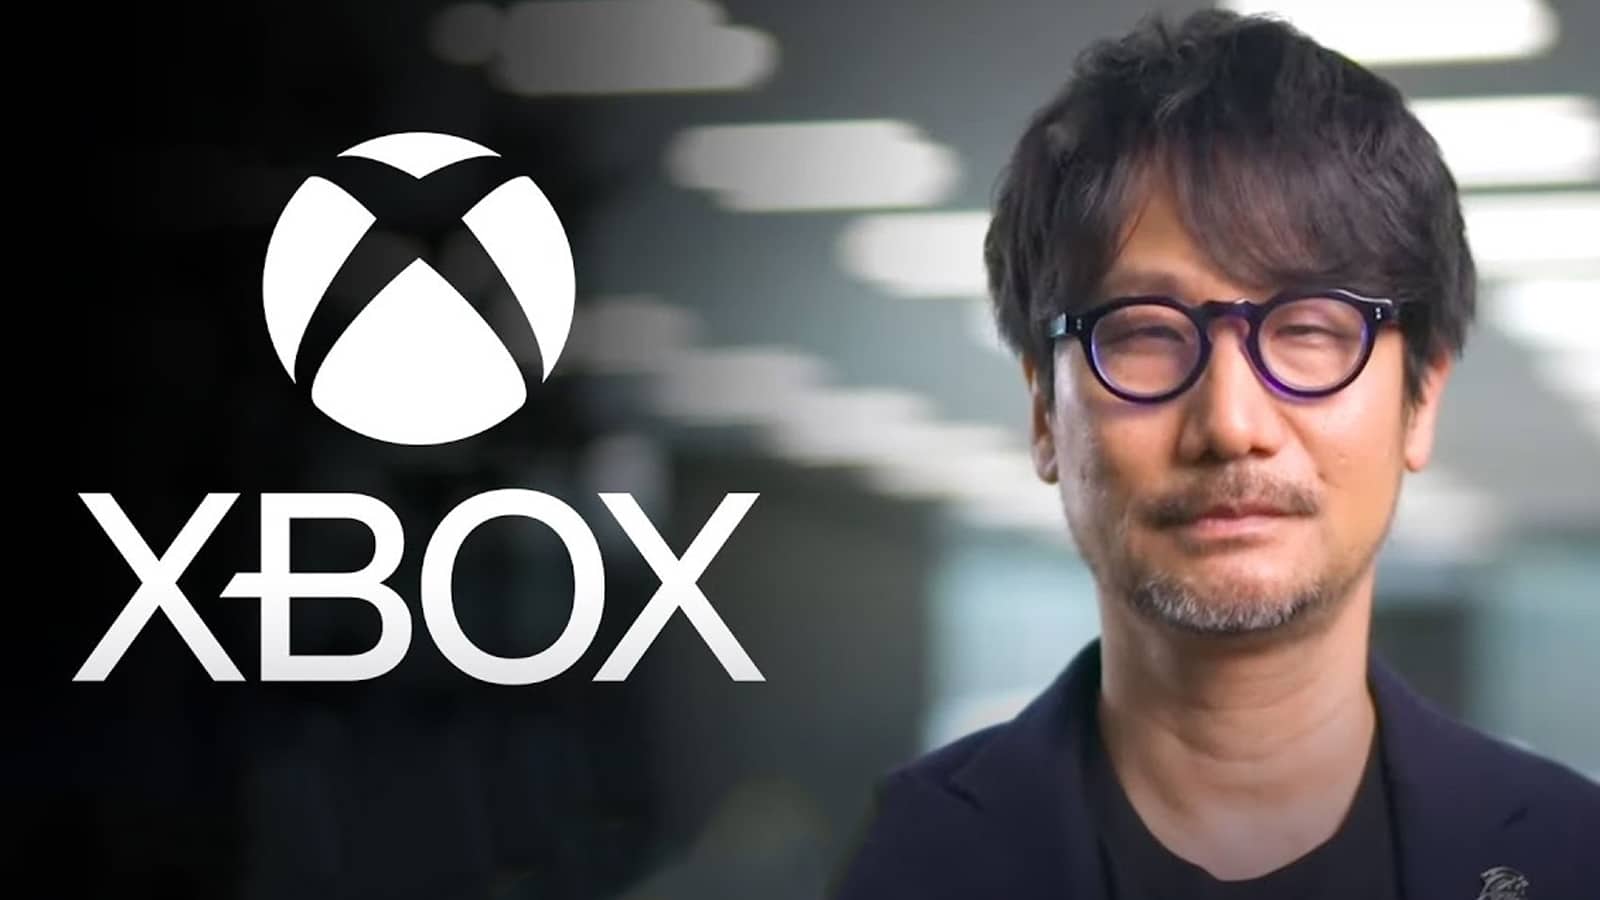 Everything we know about about OD, Hideo Kojima's new game